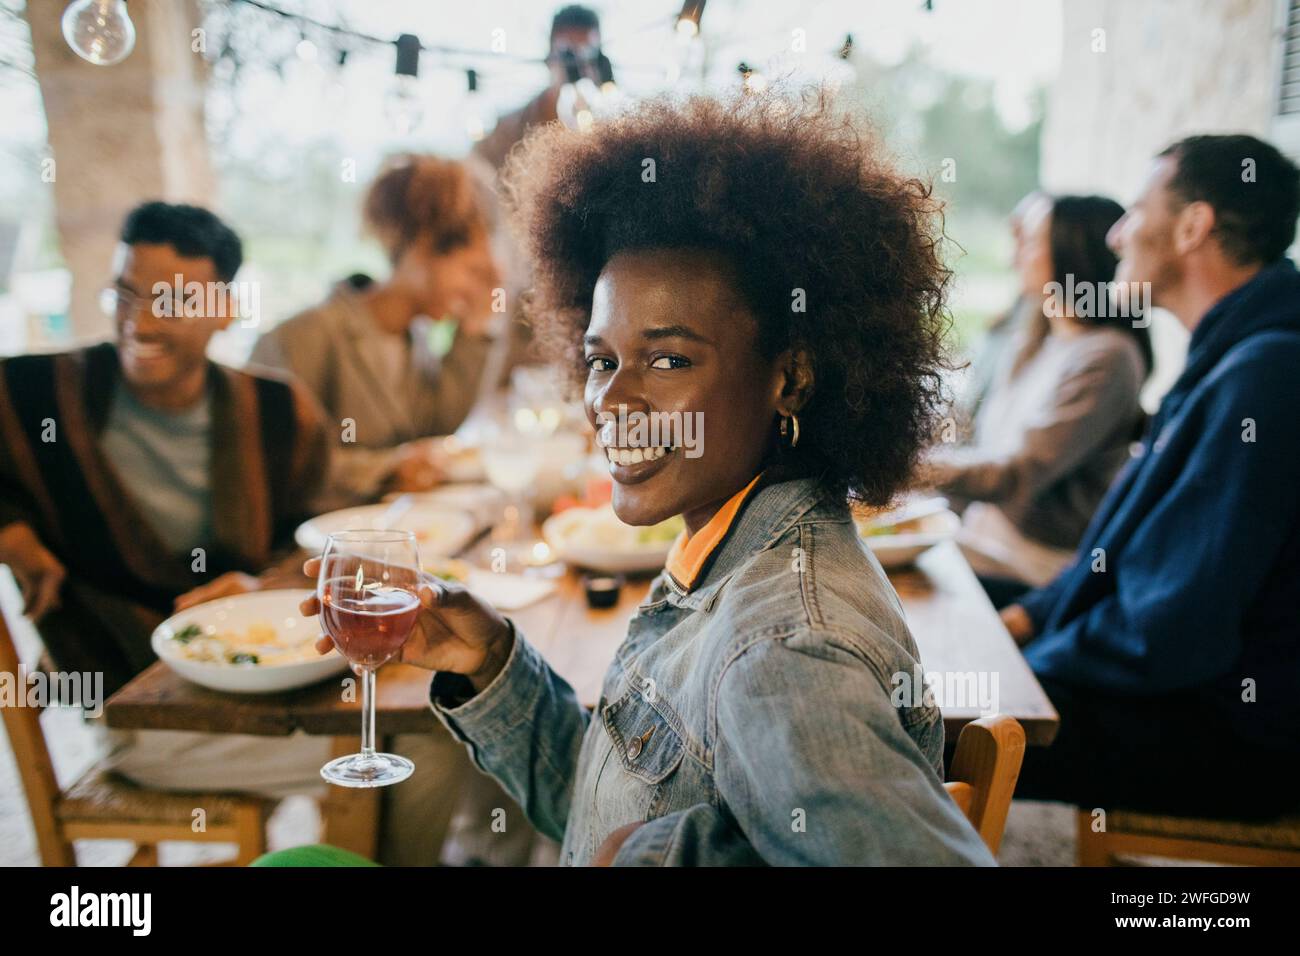 Smiling portrait of young woman with Afro hairstyle holding wineglass Stock Photo